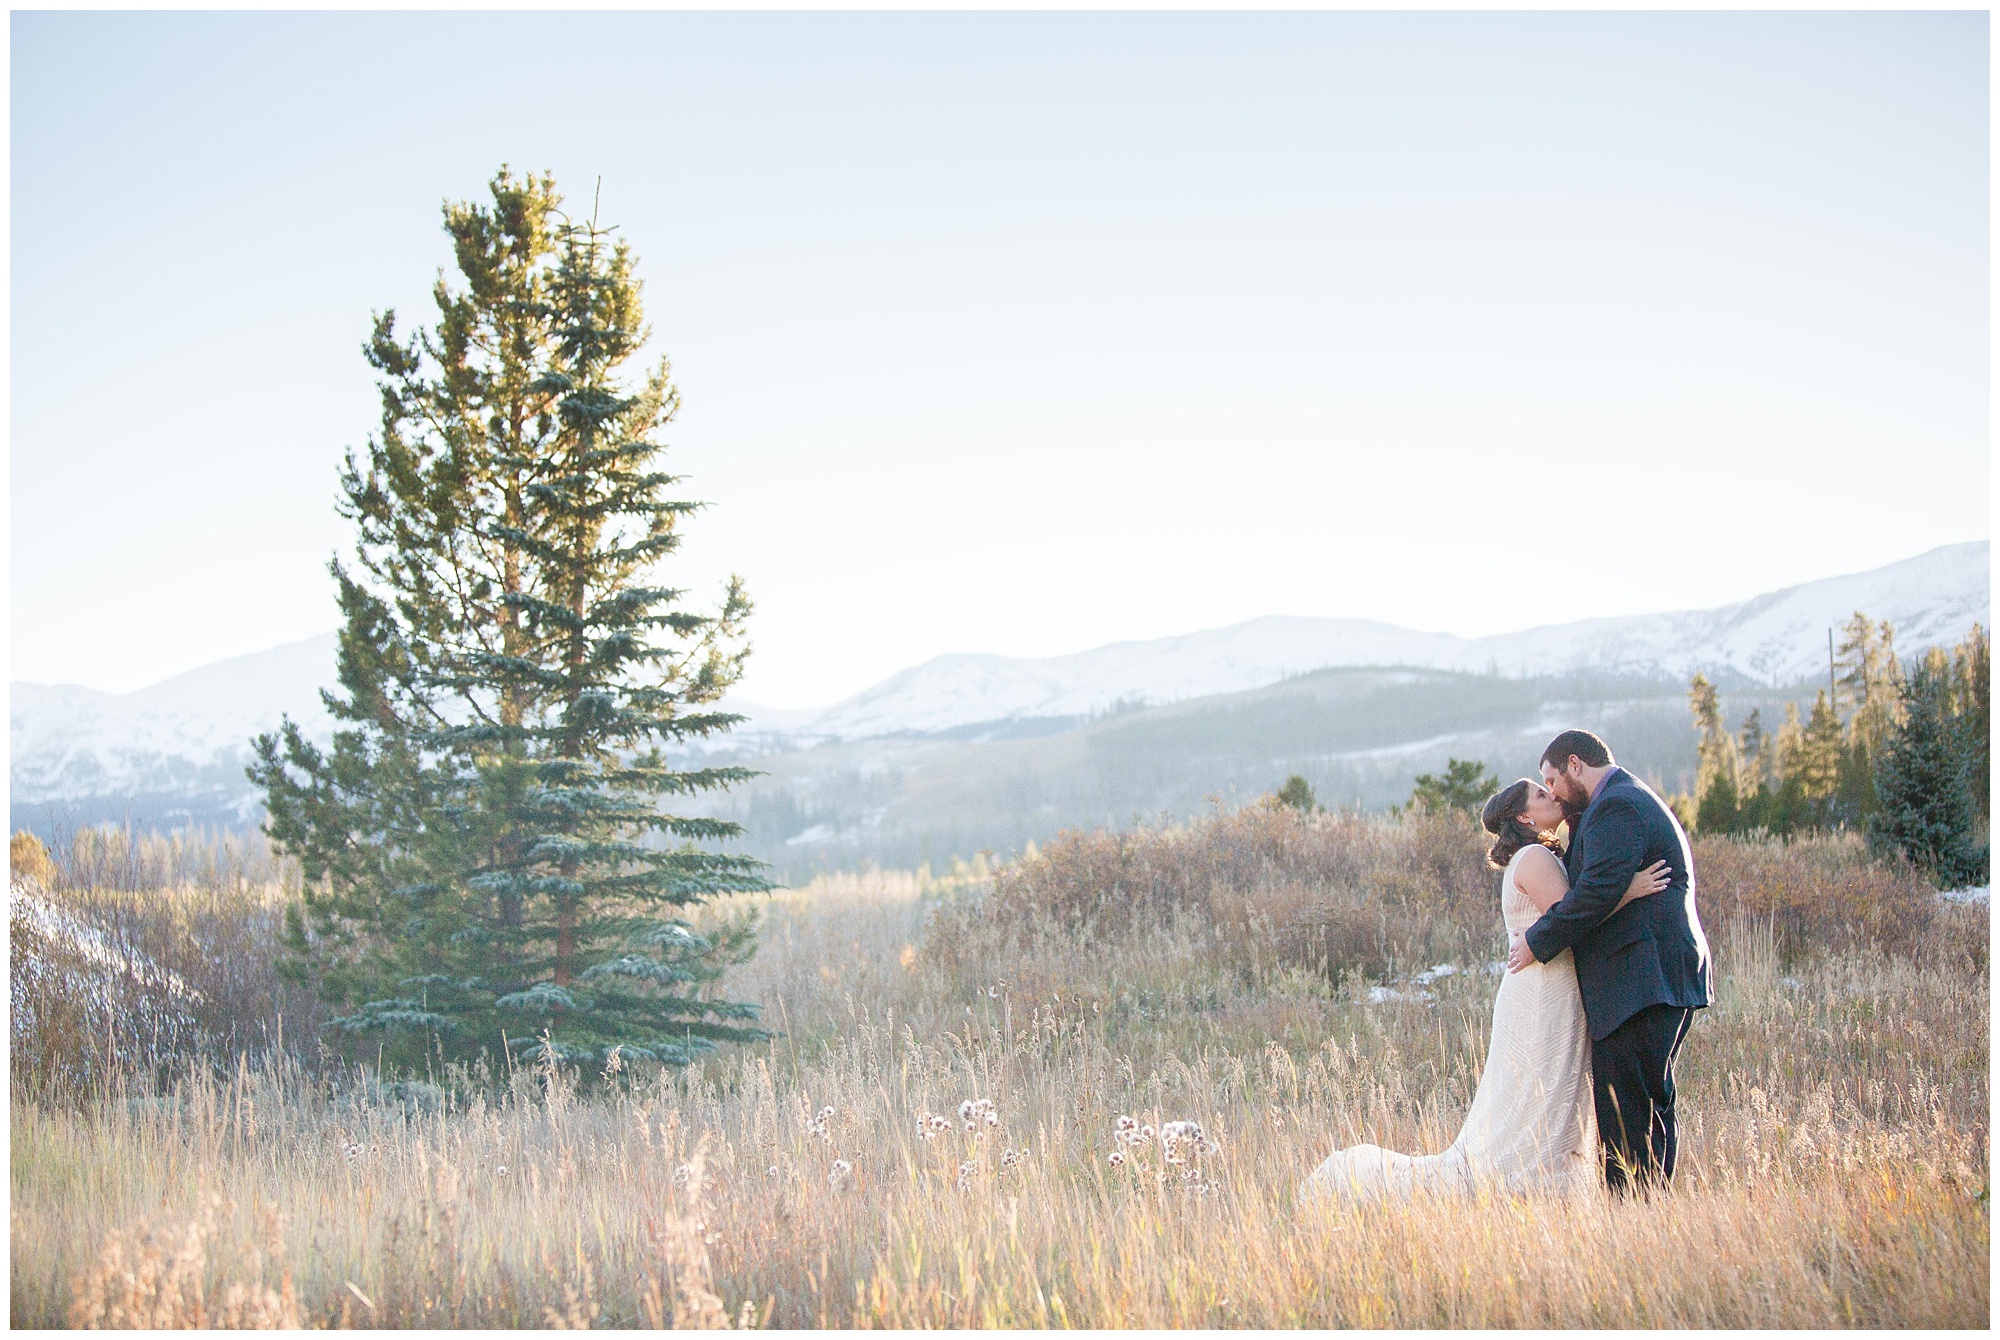 The wedding couple kiss during portraits at their Breckenridge elopement.